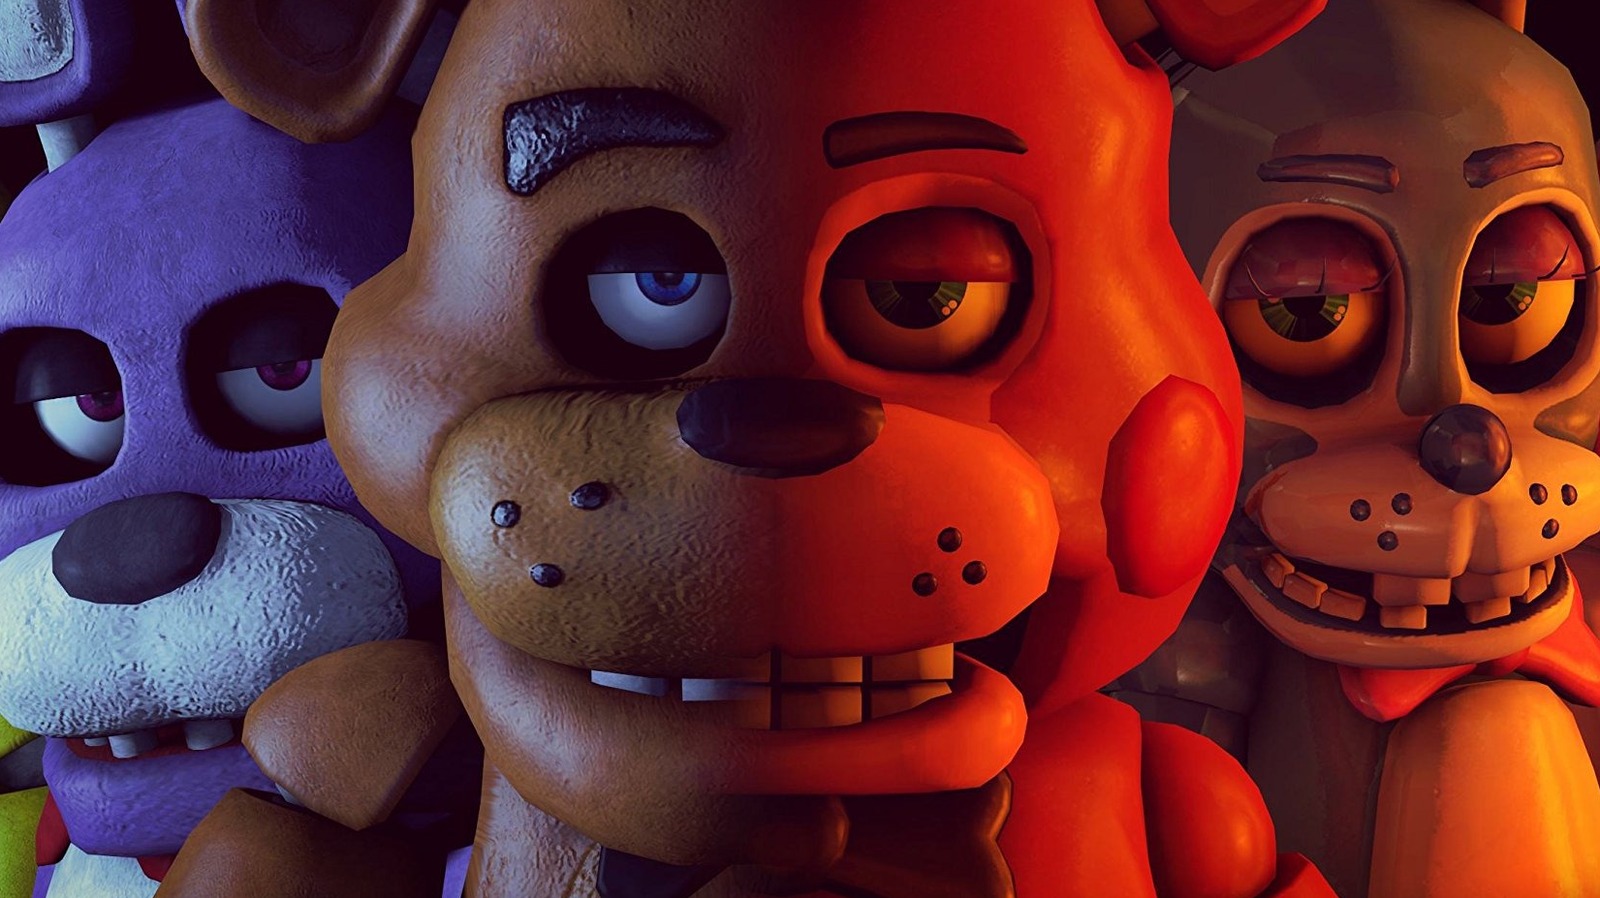 The Five Nights at Freddy's movie trailer looks just like the